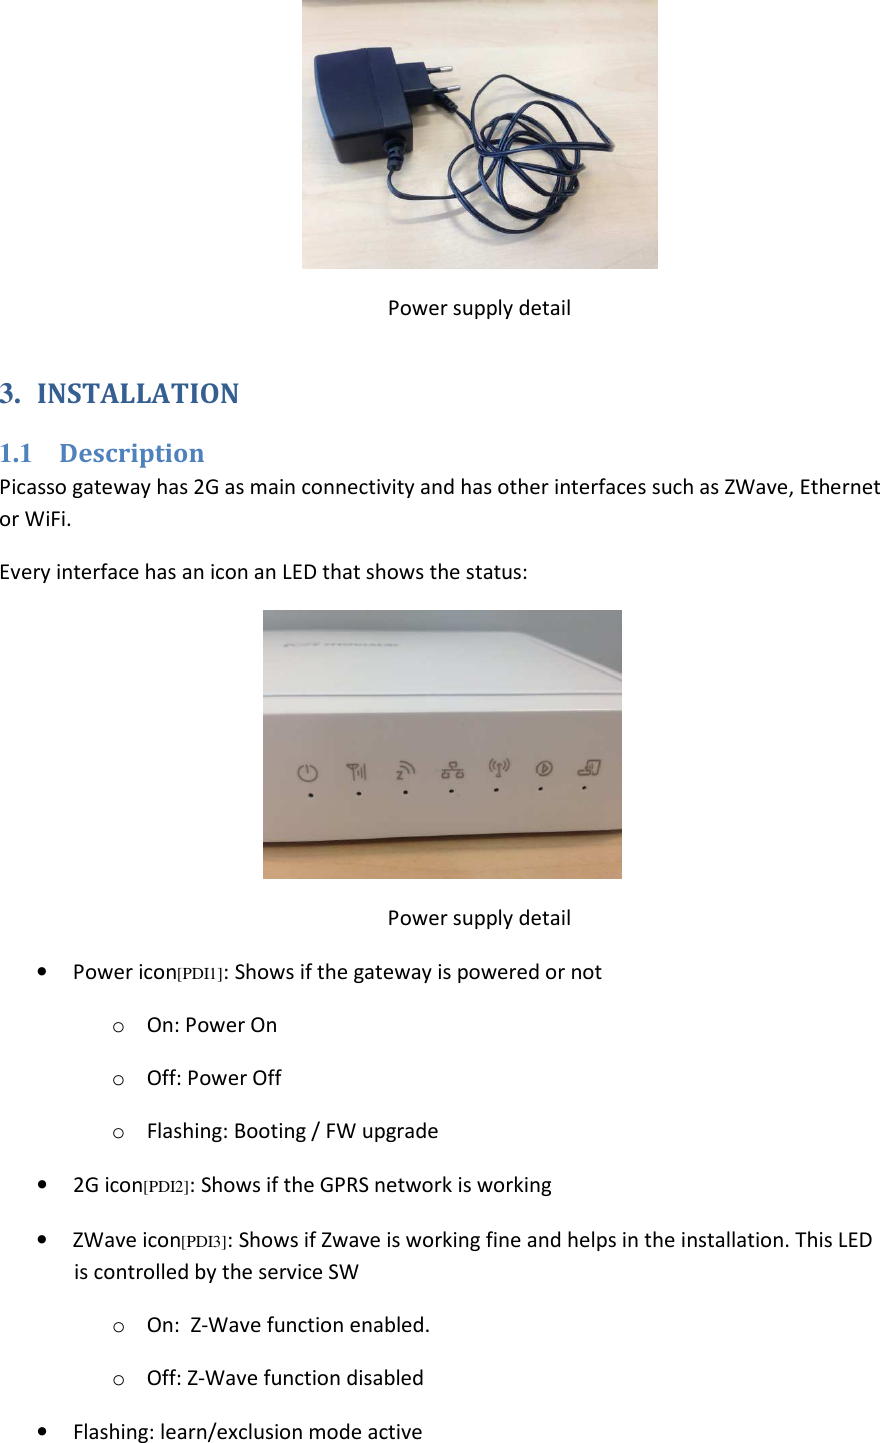  Power supply detail 3.  INSTALLATION 1.1  Description Picasso gateway has 2G as main connectivity and has other interfaces such as ZWave, Ethernet or WiFi. Every interface has an icon an LED that shows the status:  Power supply detail •  Power icon[PDI1]: Shows if the gateway is powered or not o  On: Power On o  Off: Power Off o  Flashing: Booting / FW upgrade •  2G icon[PDI2]: Shows if the GPRS network is working •  ZWave icon[PDI3]: Shows if Zwave is working fine and helps in the installation. This LED is controlled by the service SW o  On:  Z-Wave function enabled.  o  Off: Z-Wave function disabled  •  Flashing: learn/exclusion mode active 